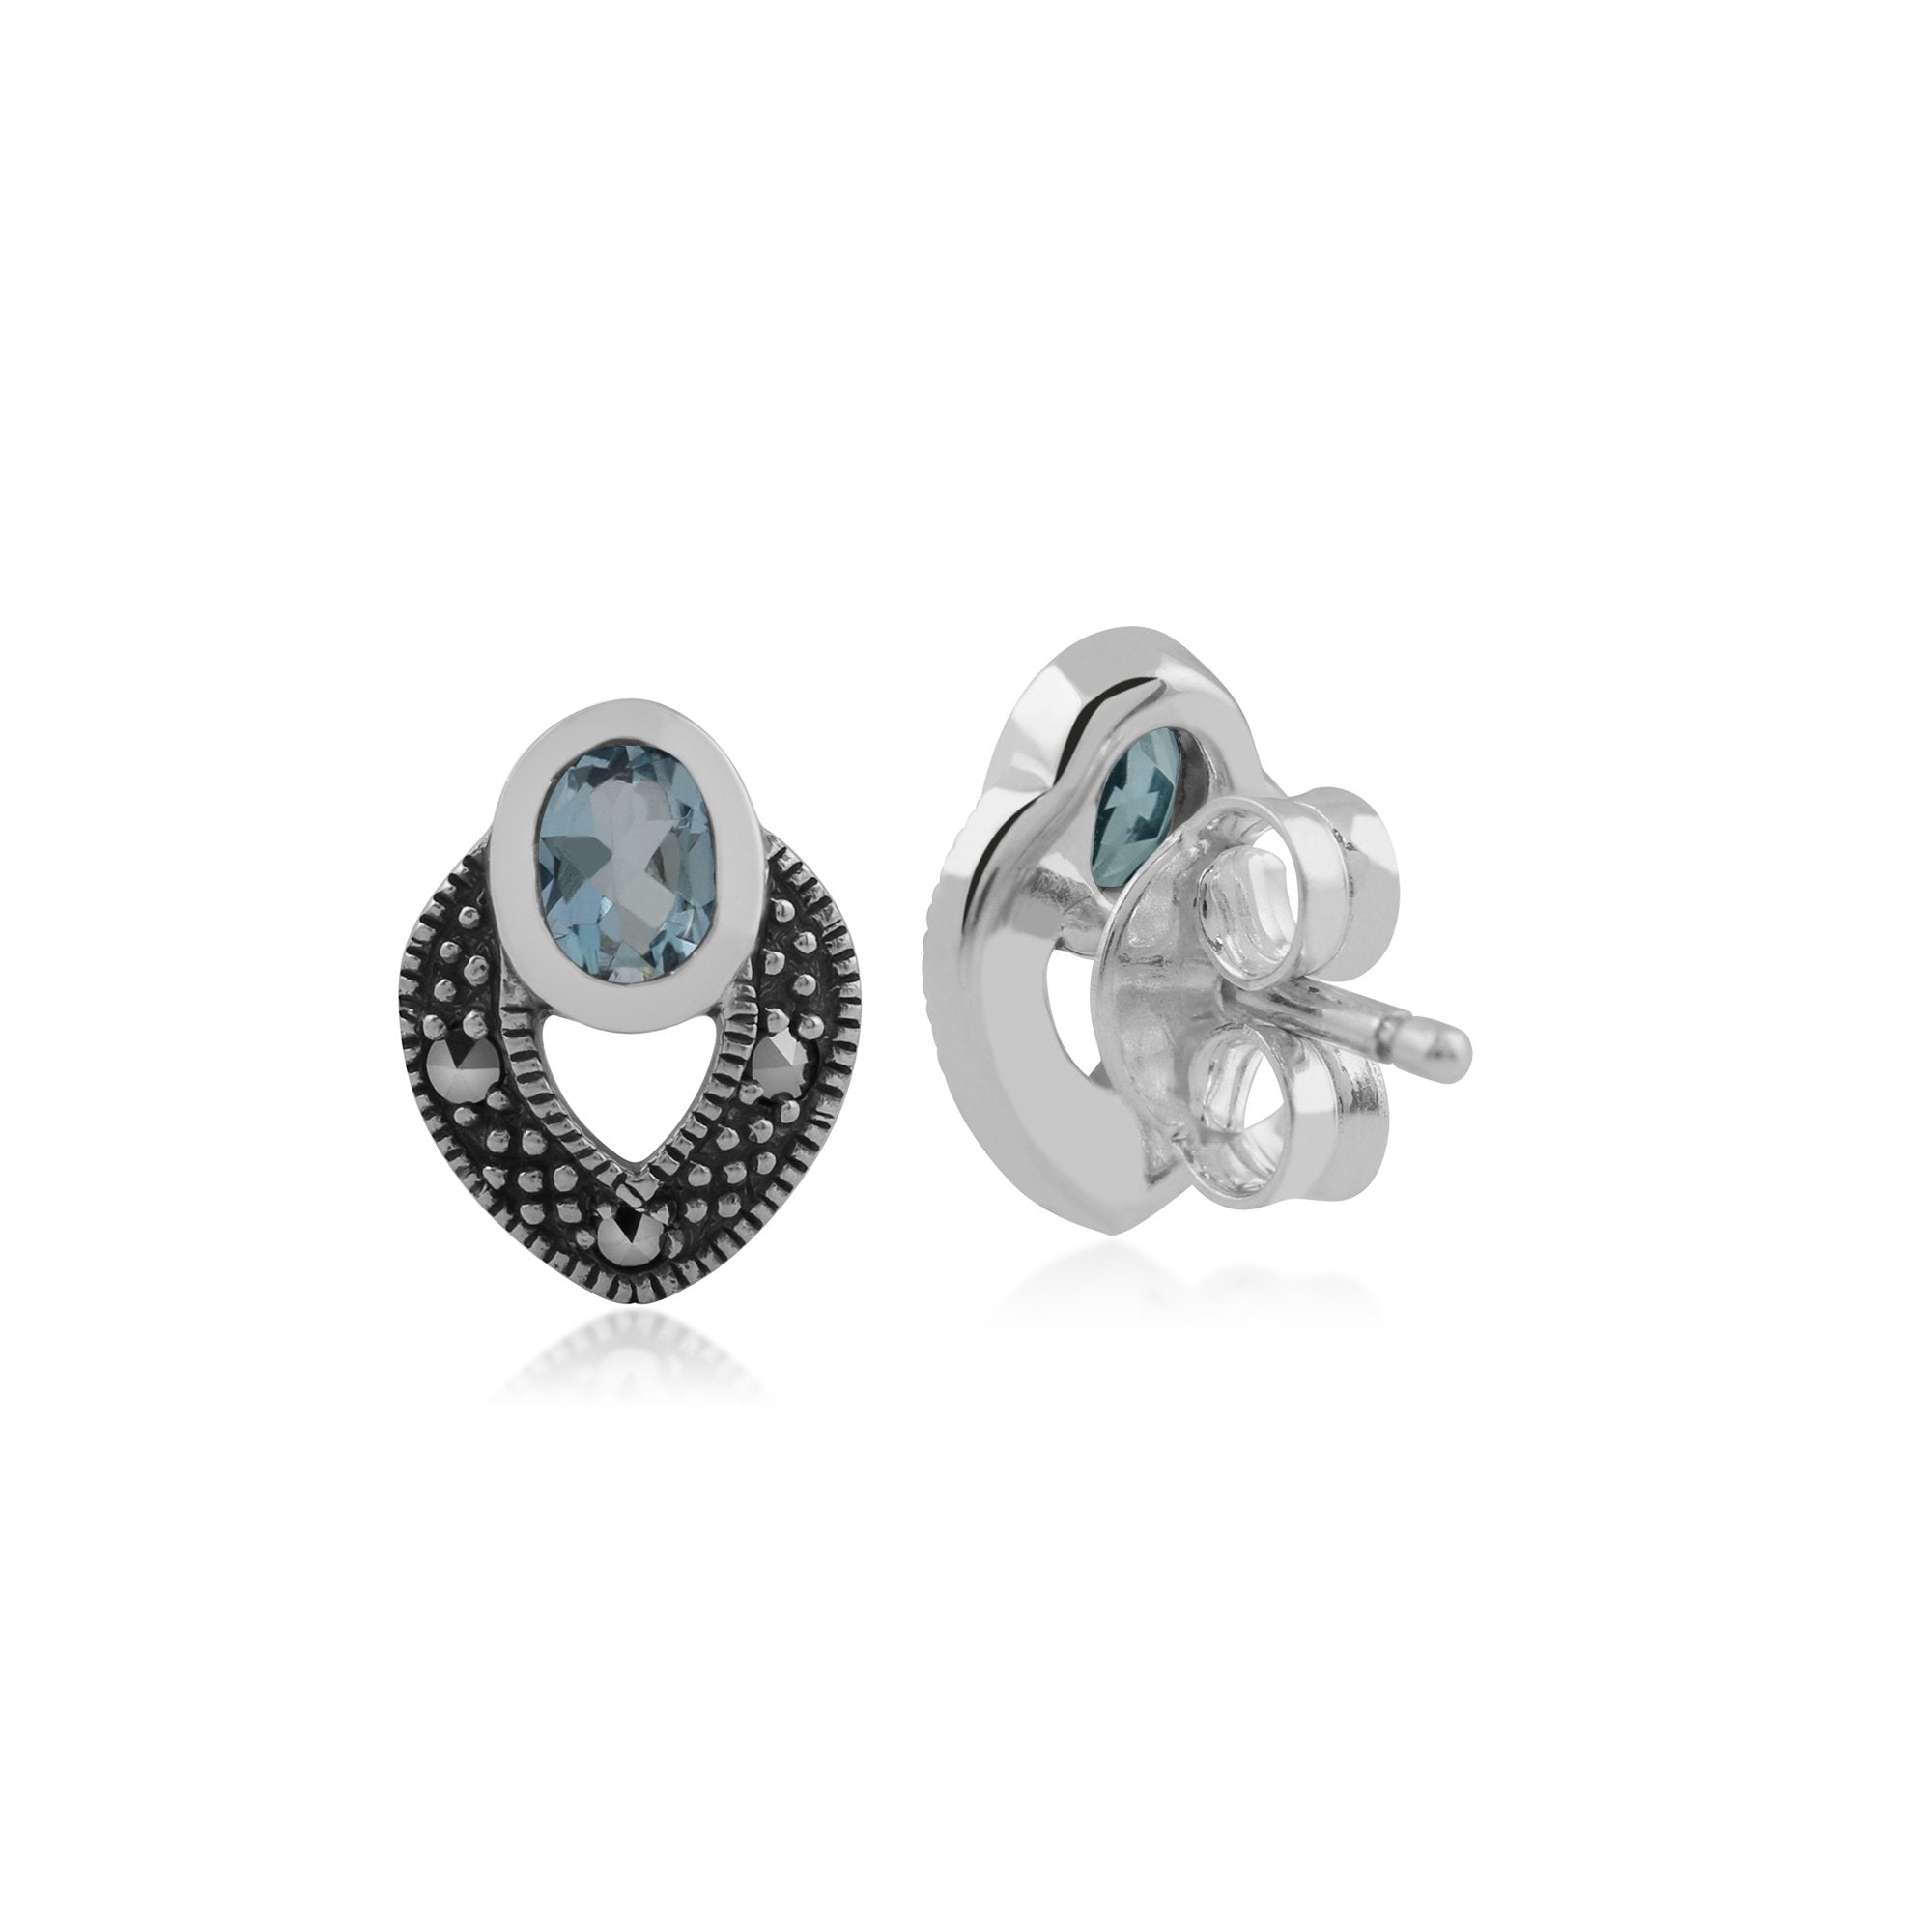 Art Deco Style Oval Aquamarine & Marcasite Stud Earrings in 925 Sterling Silver